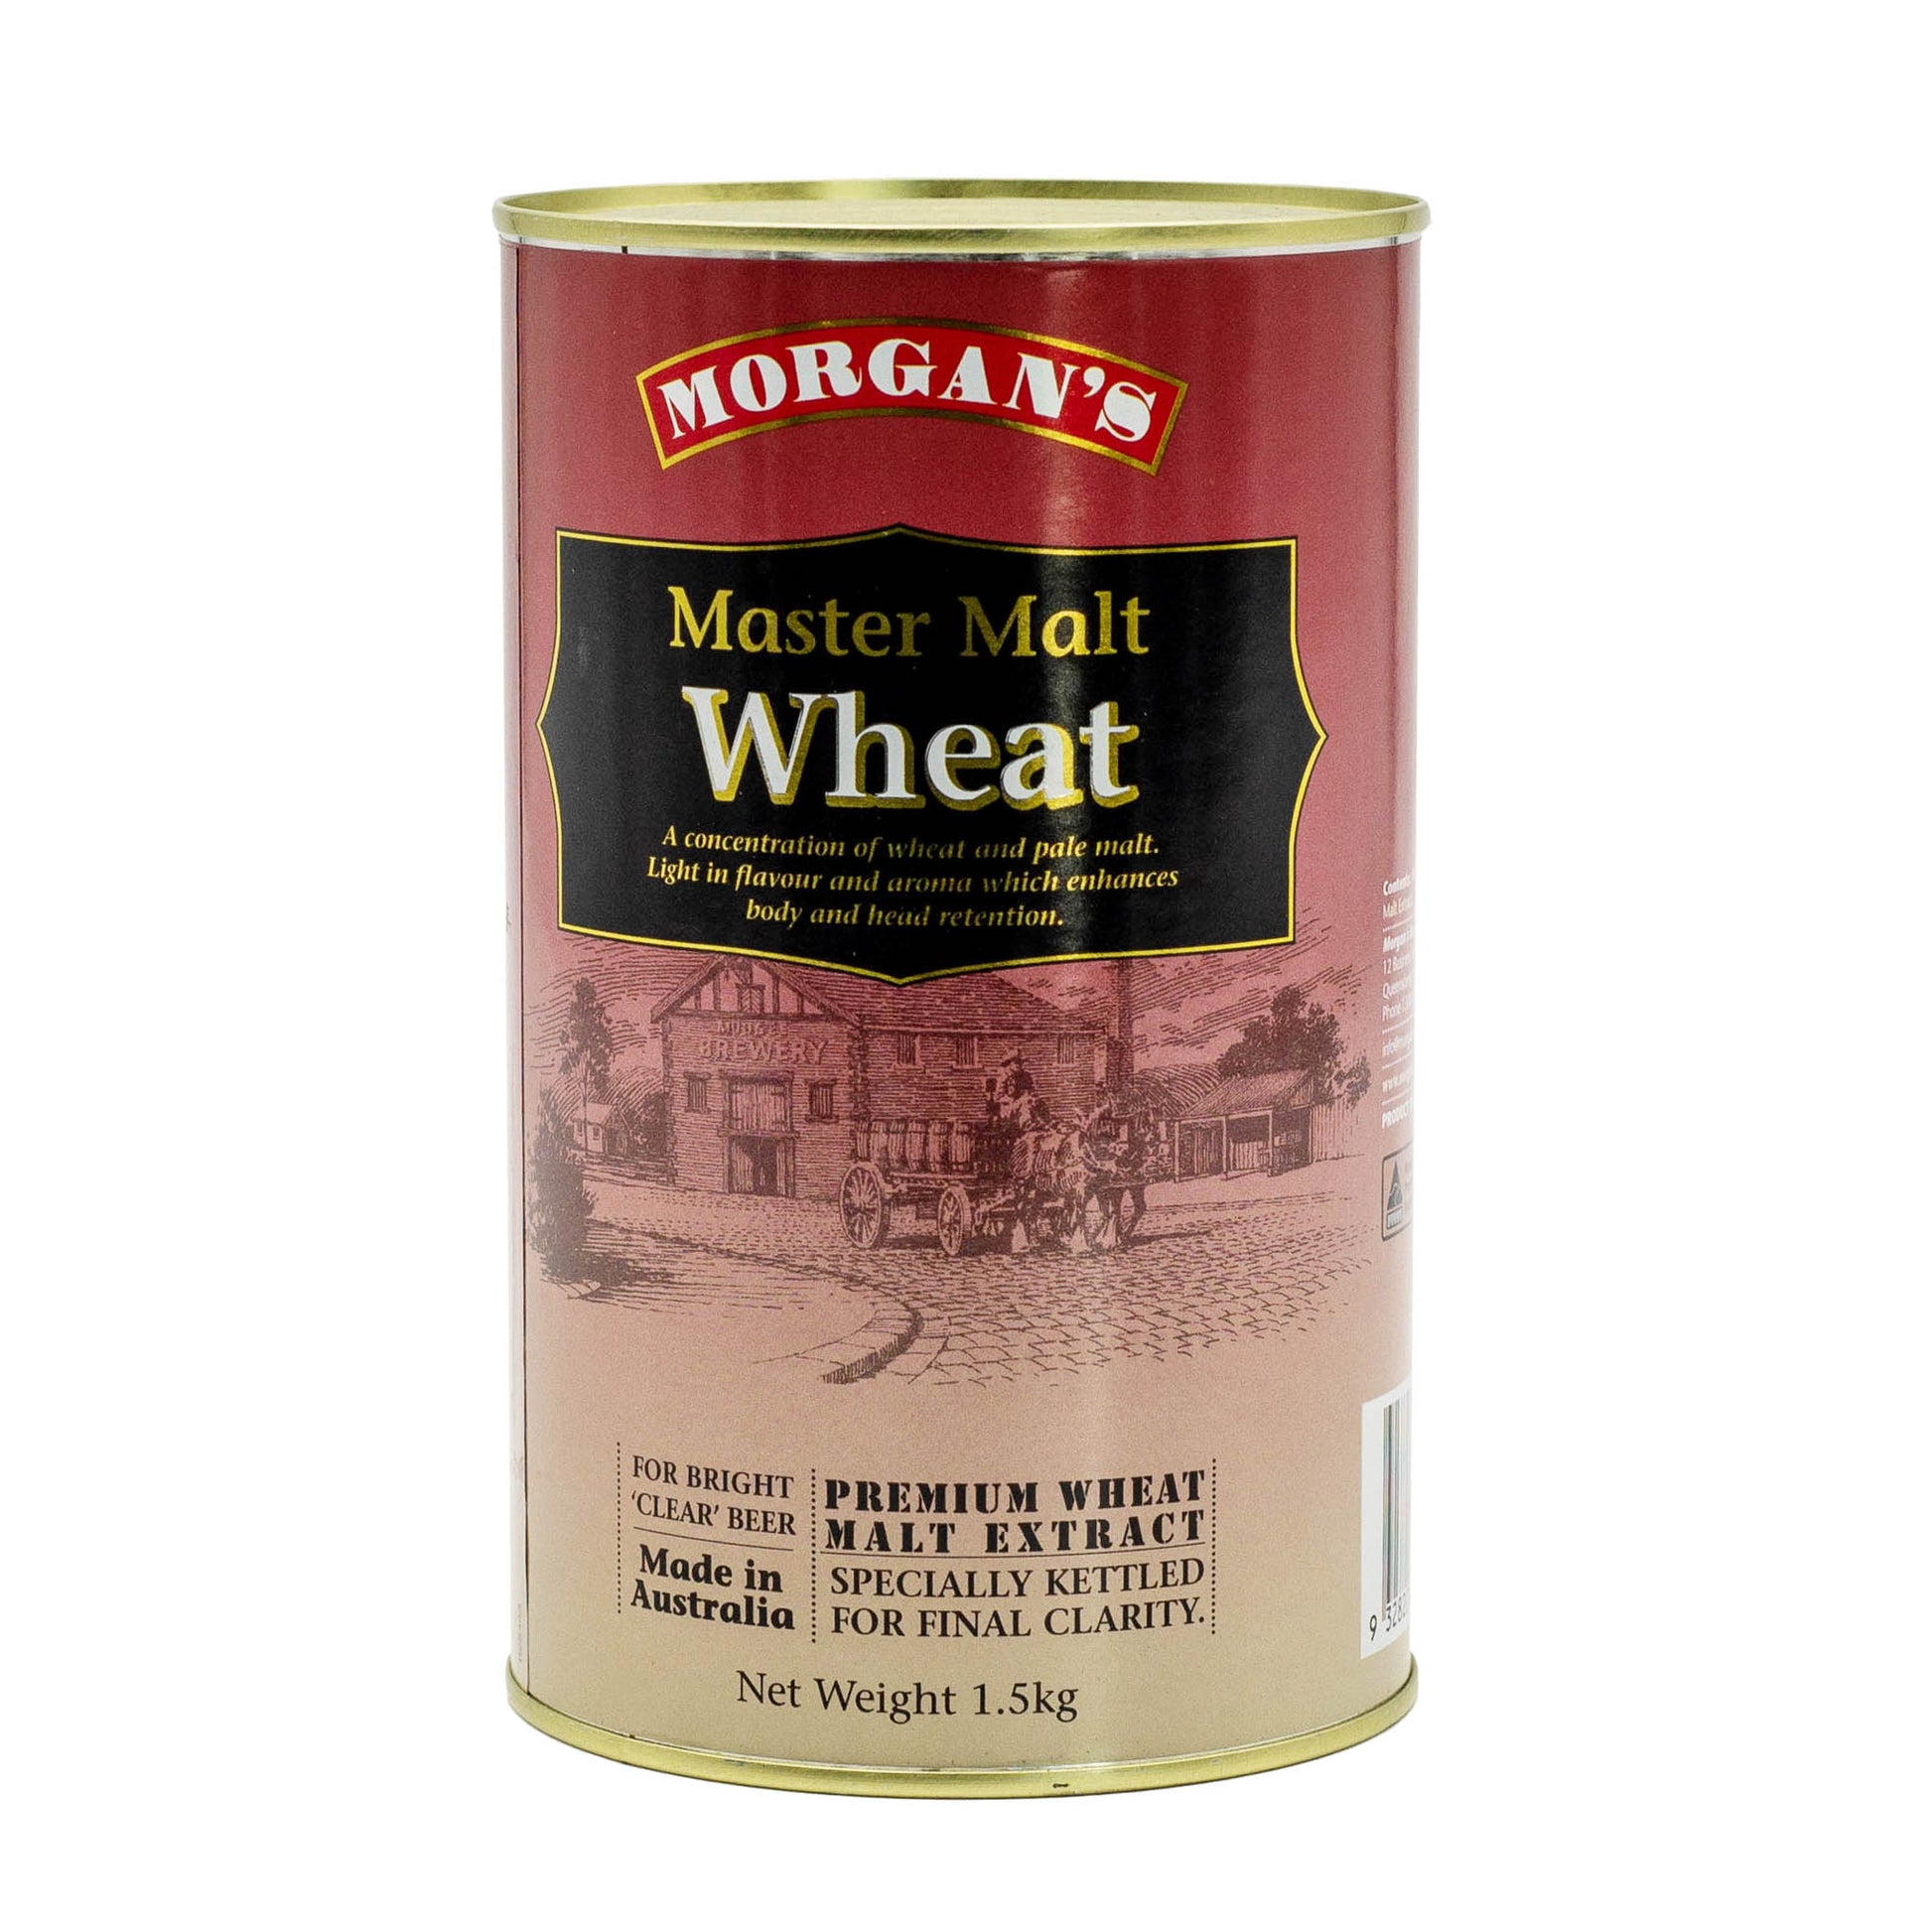 Morgans Mast Malt Wheat brew tin for a Full Wheat grainy flavour and aroma